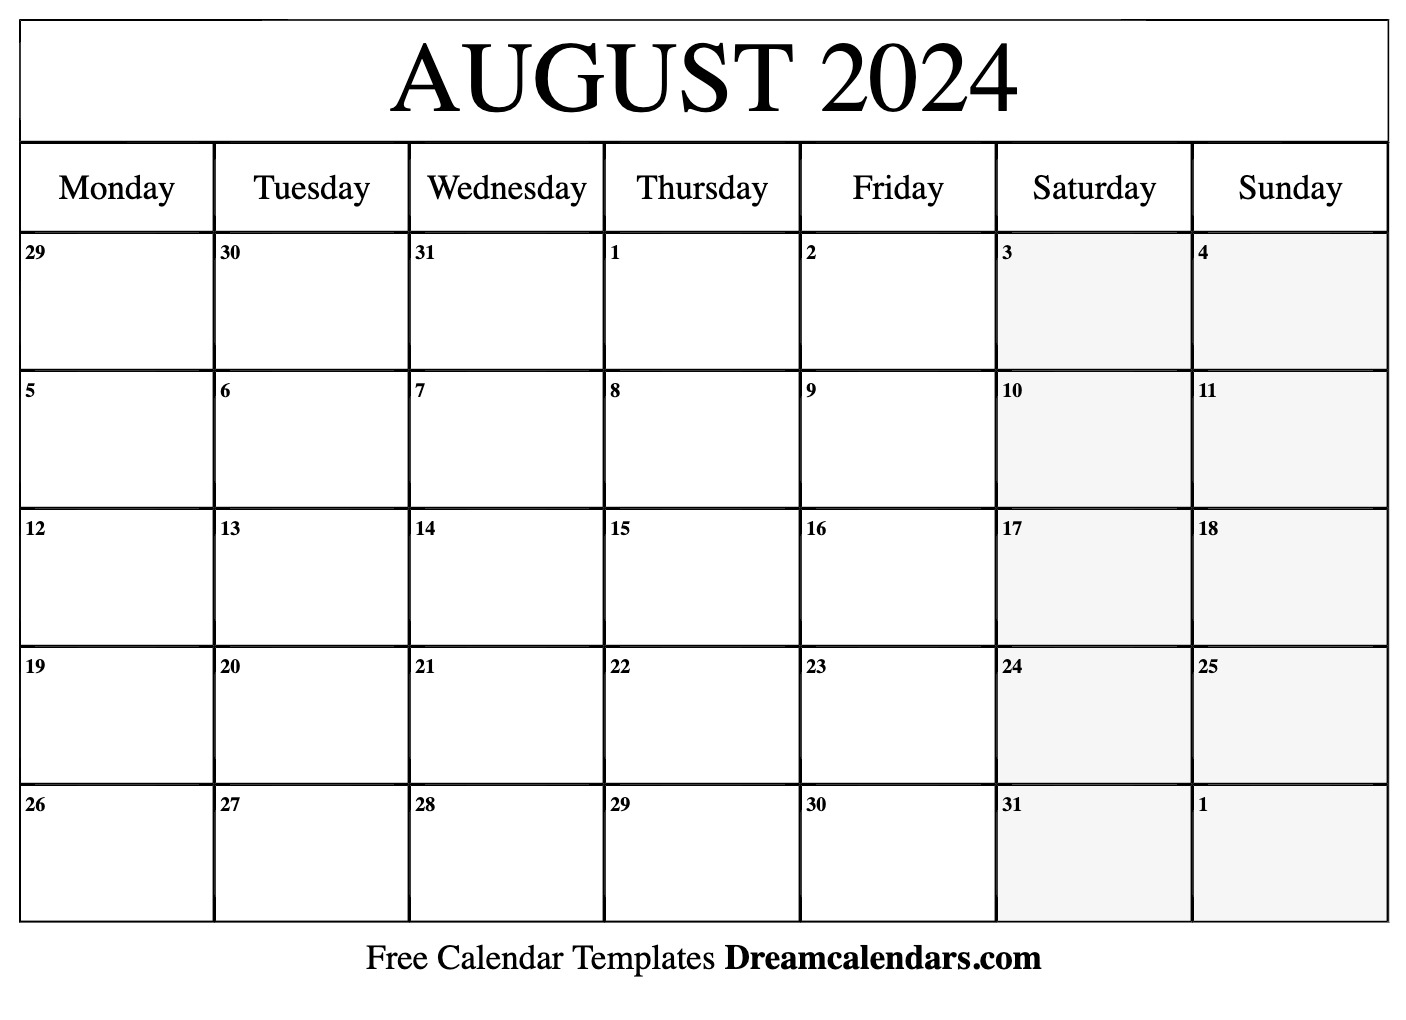 August 2024 Calendar | Free Blank Printable With Holidays for May June July August 2024 Calendar Printable